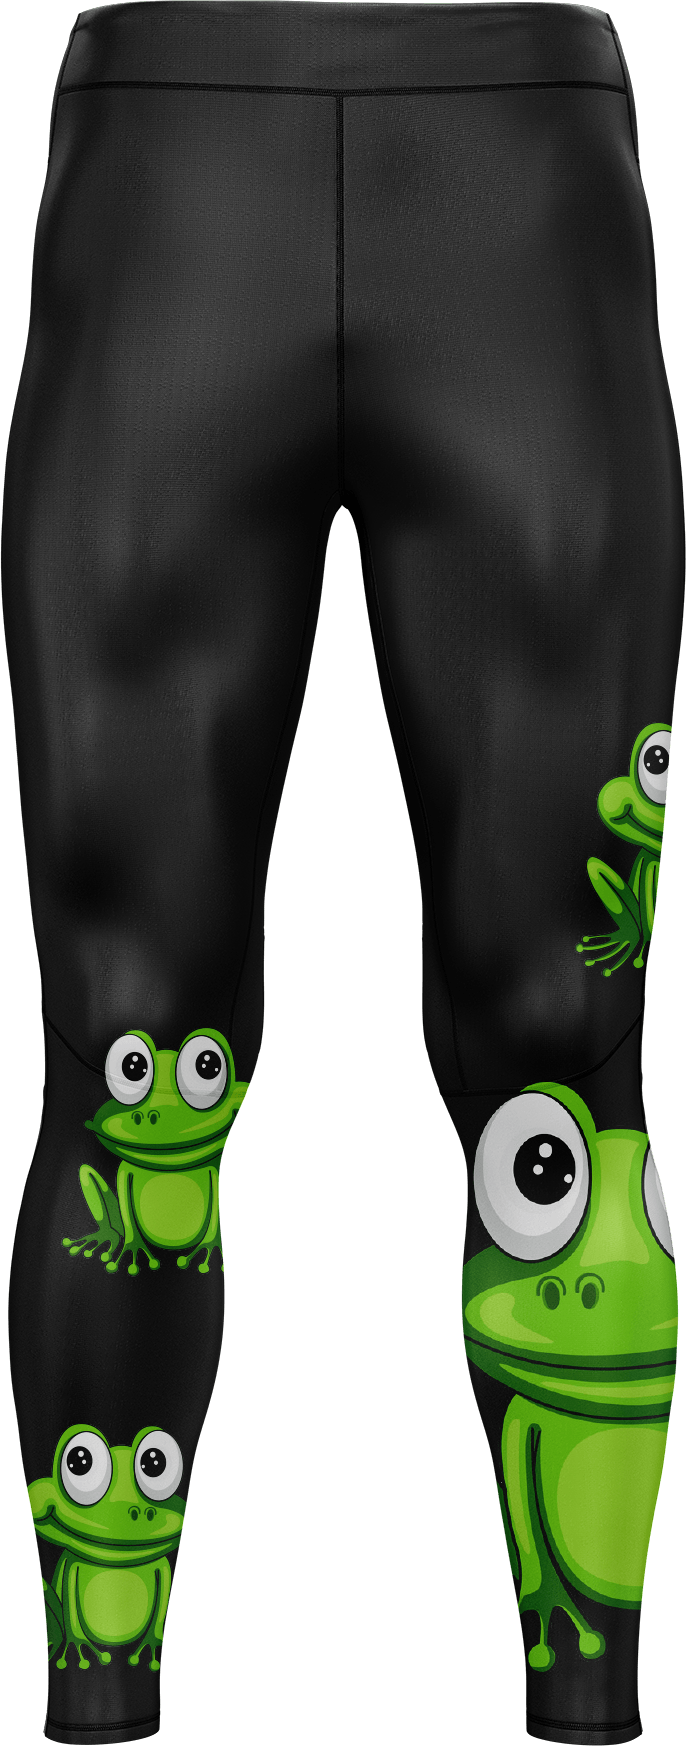 Freaky Frog tights 3/4 or full length - fungear.com.au